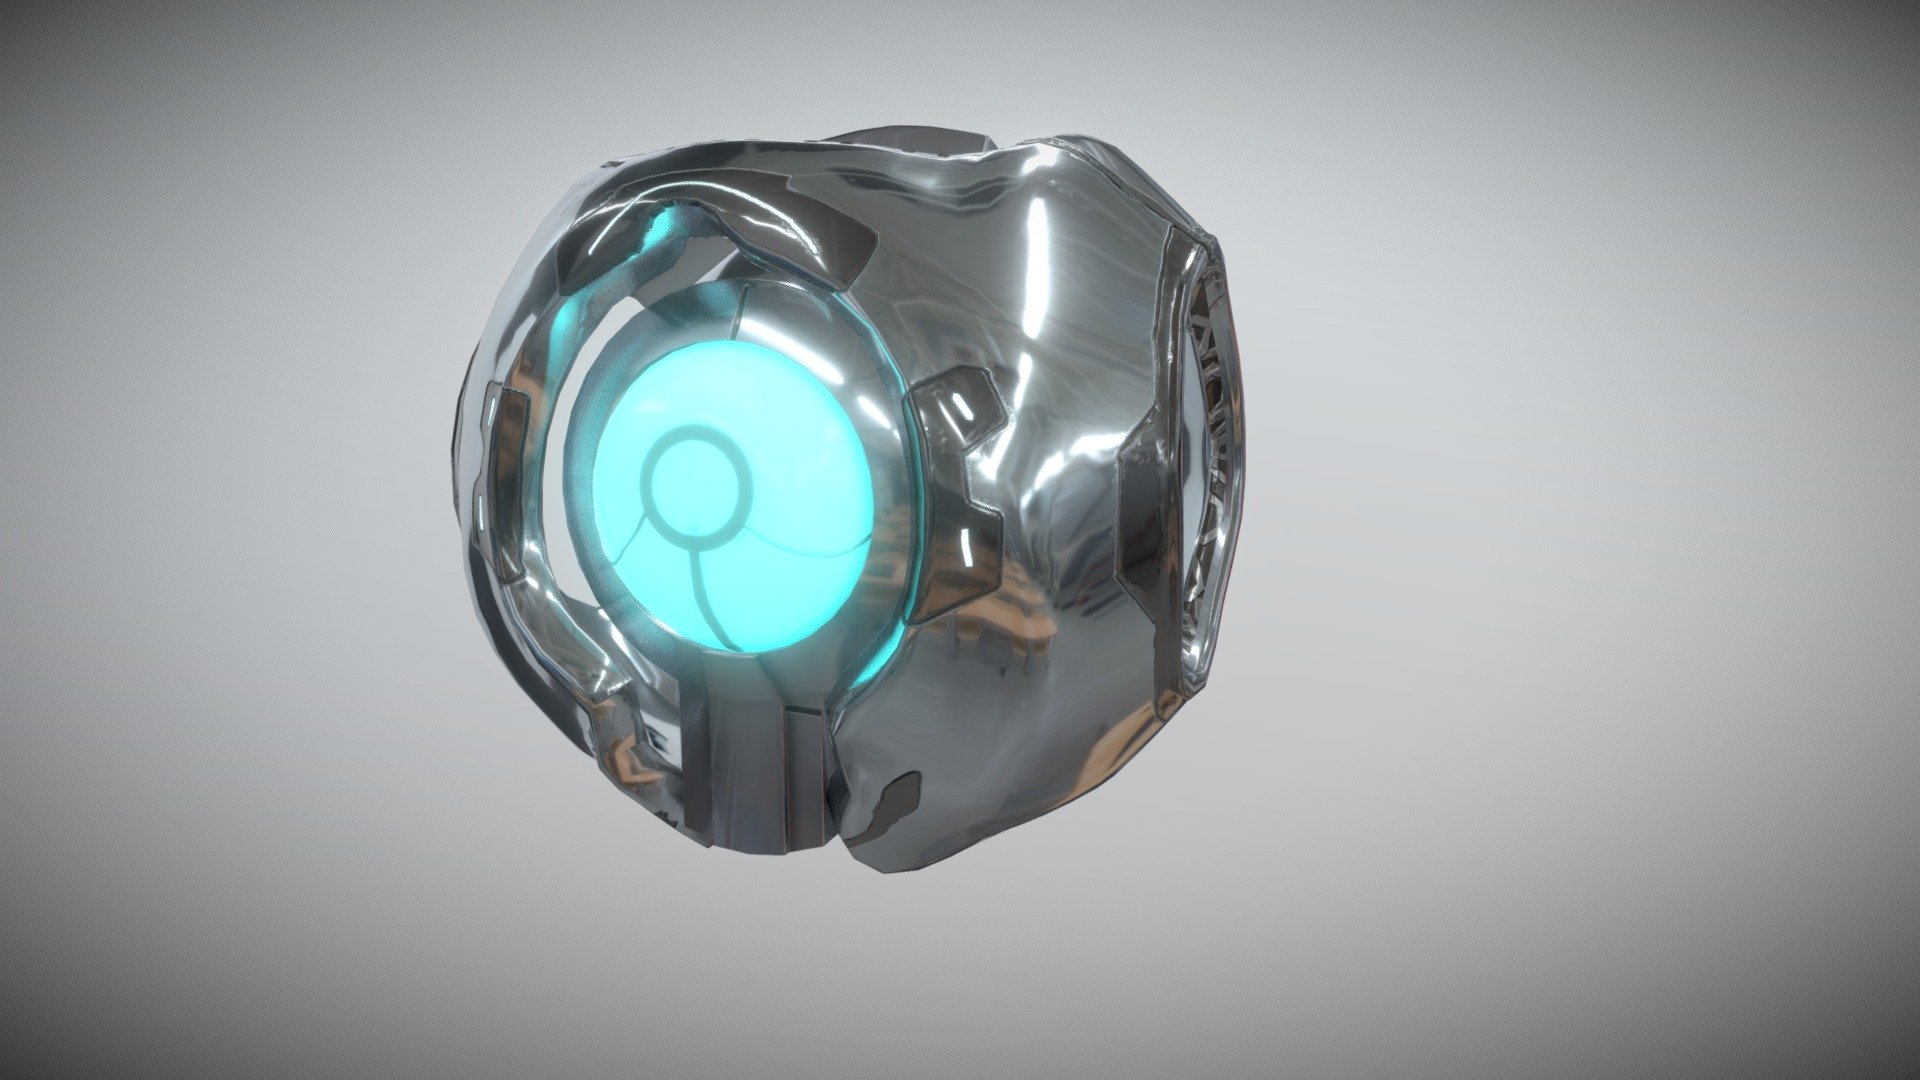 343-guilty-spark-from-halo-download-free-3d-model-by-ryanwill679-08598cb-sketchfab